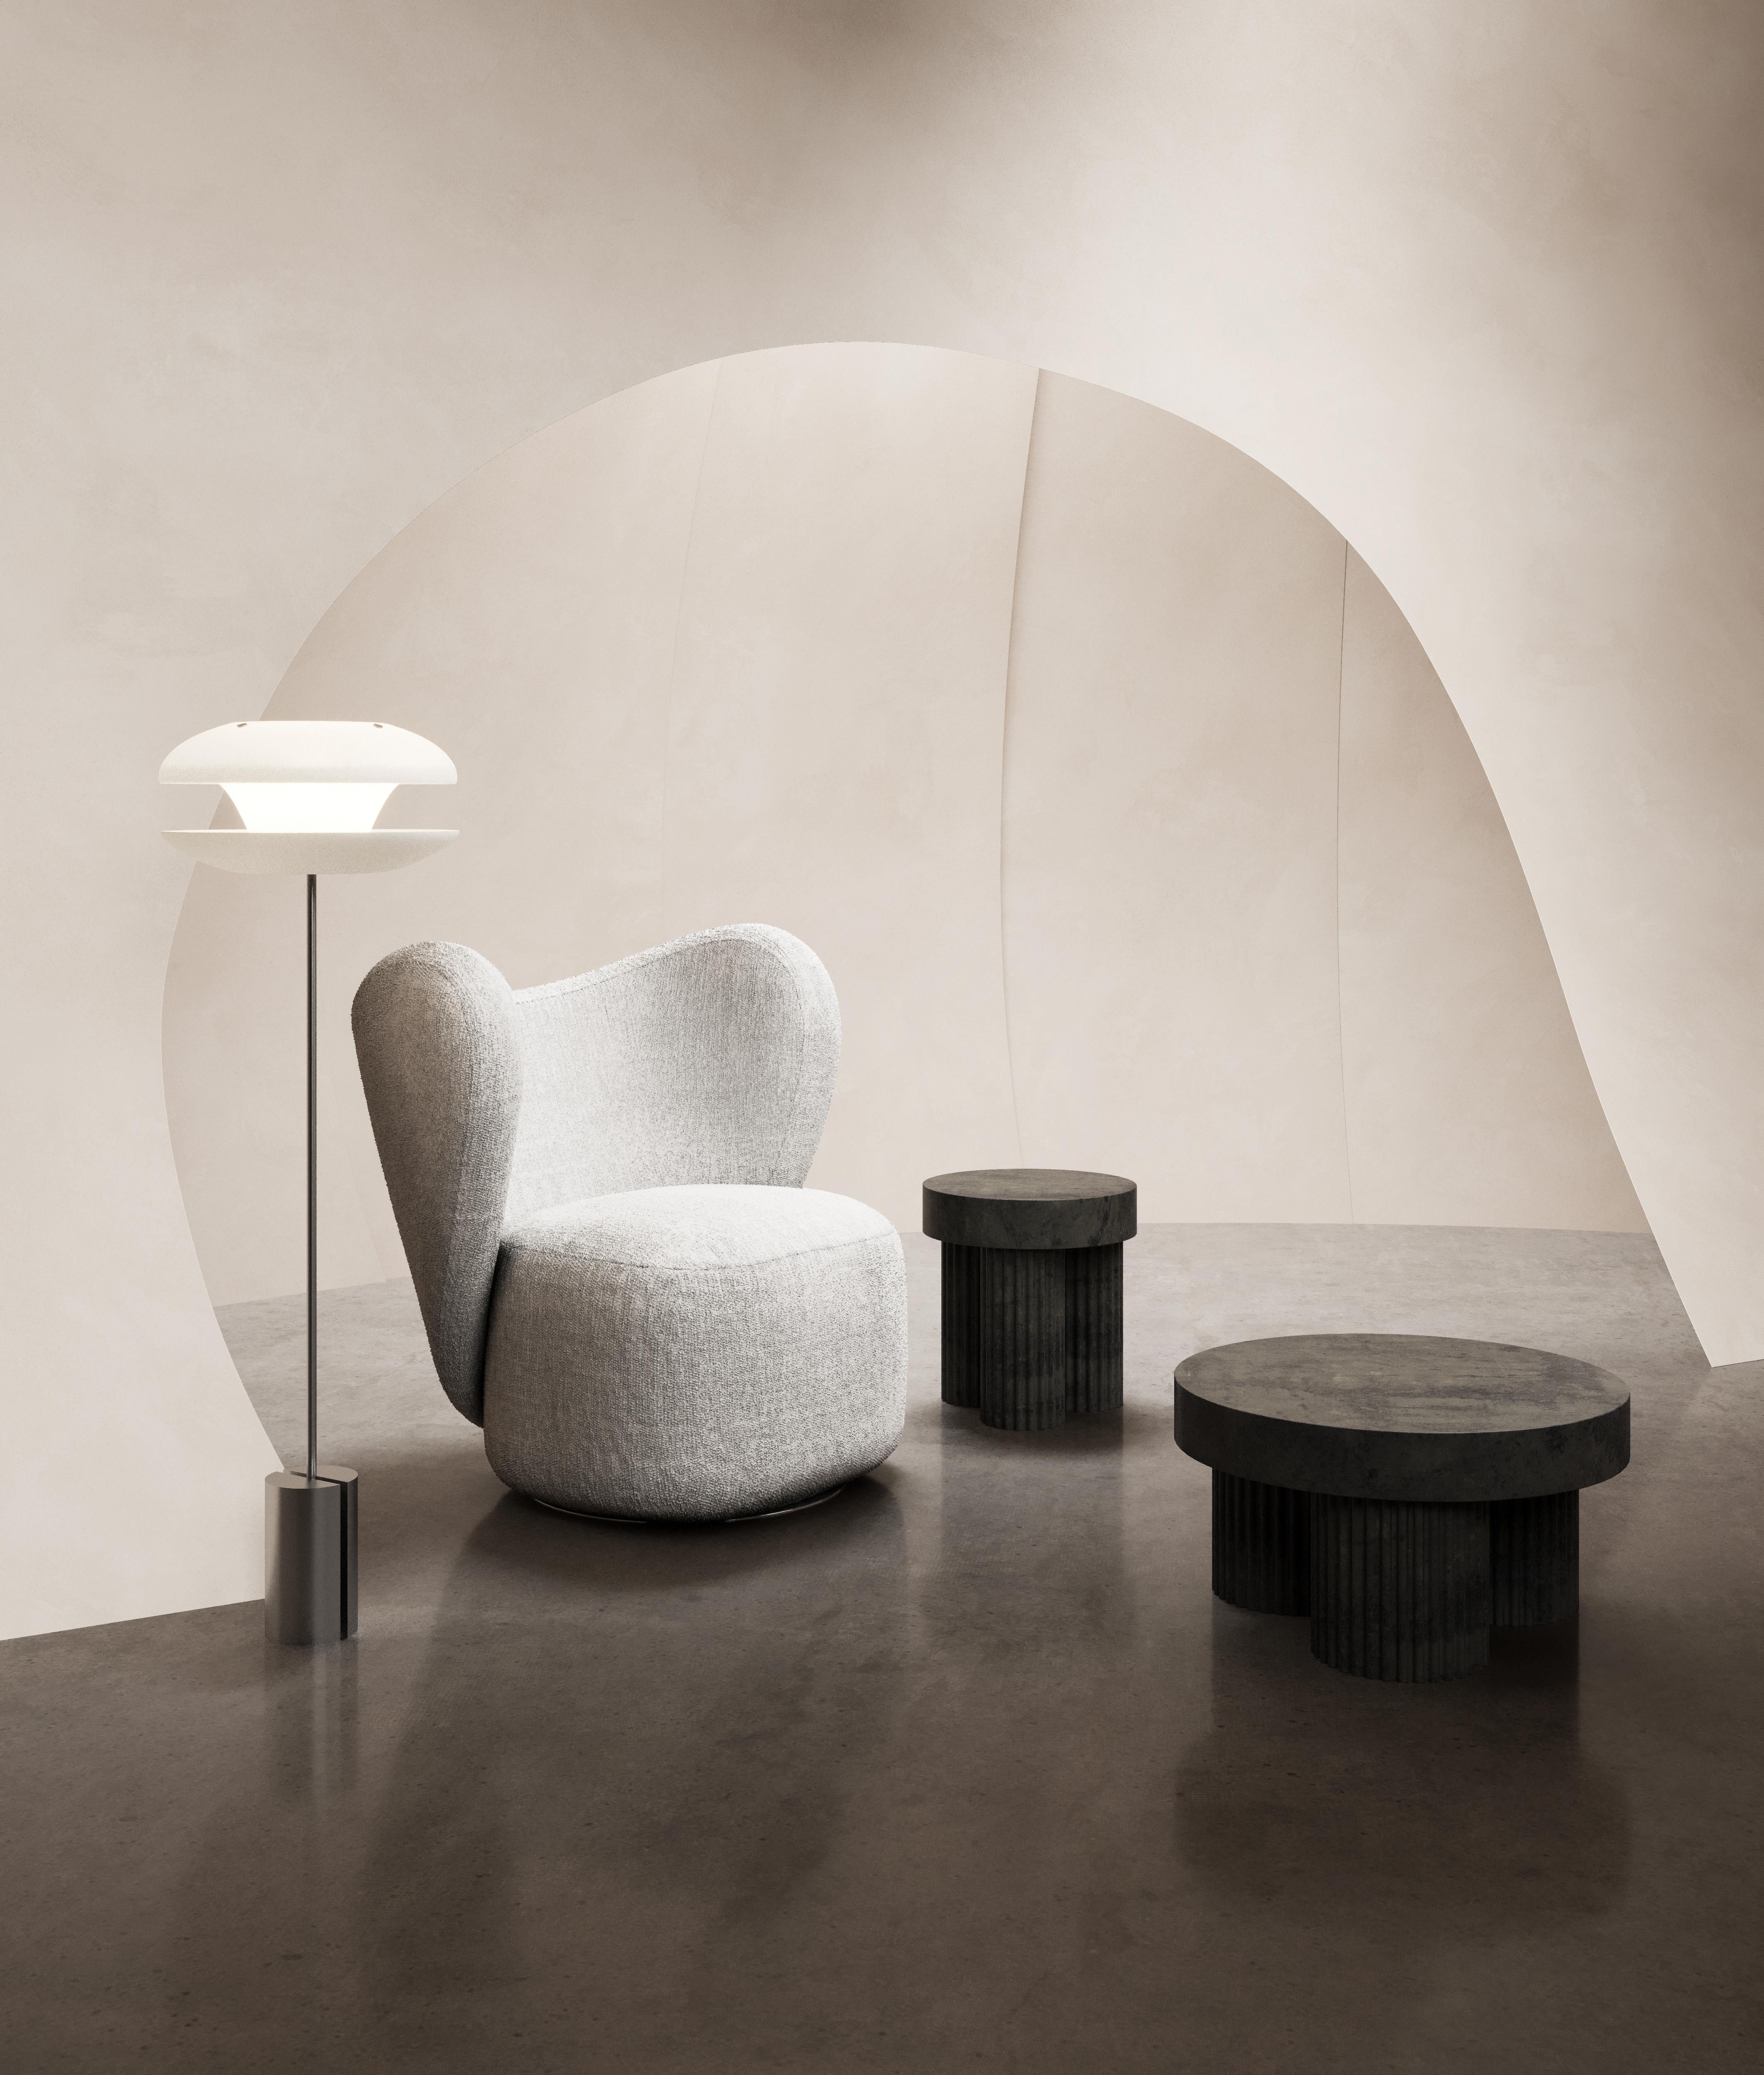 Gear is inspired by Brutalism Architecture from the mid-20th century. The sculptural coffee and side tables are designed as block-like structures, reflecting architectural building components of concrete. The Gear tables comes with a circular table